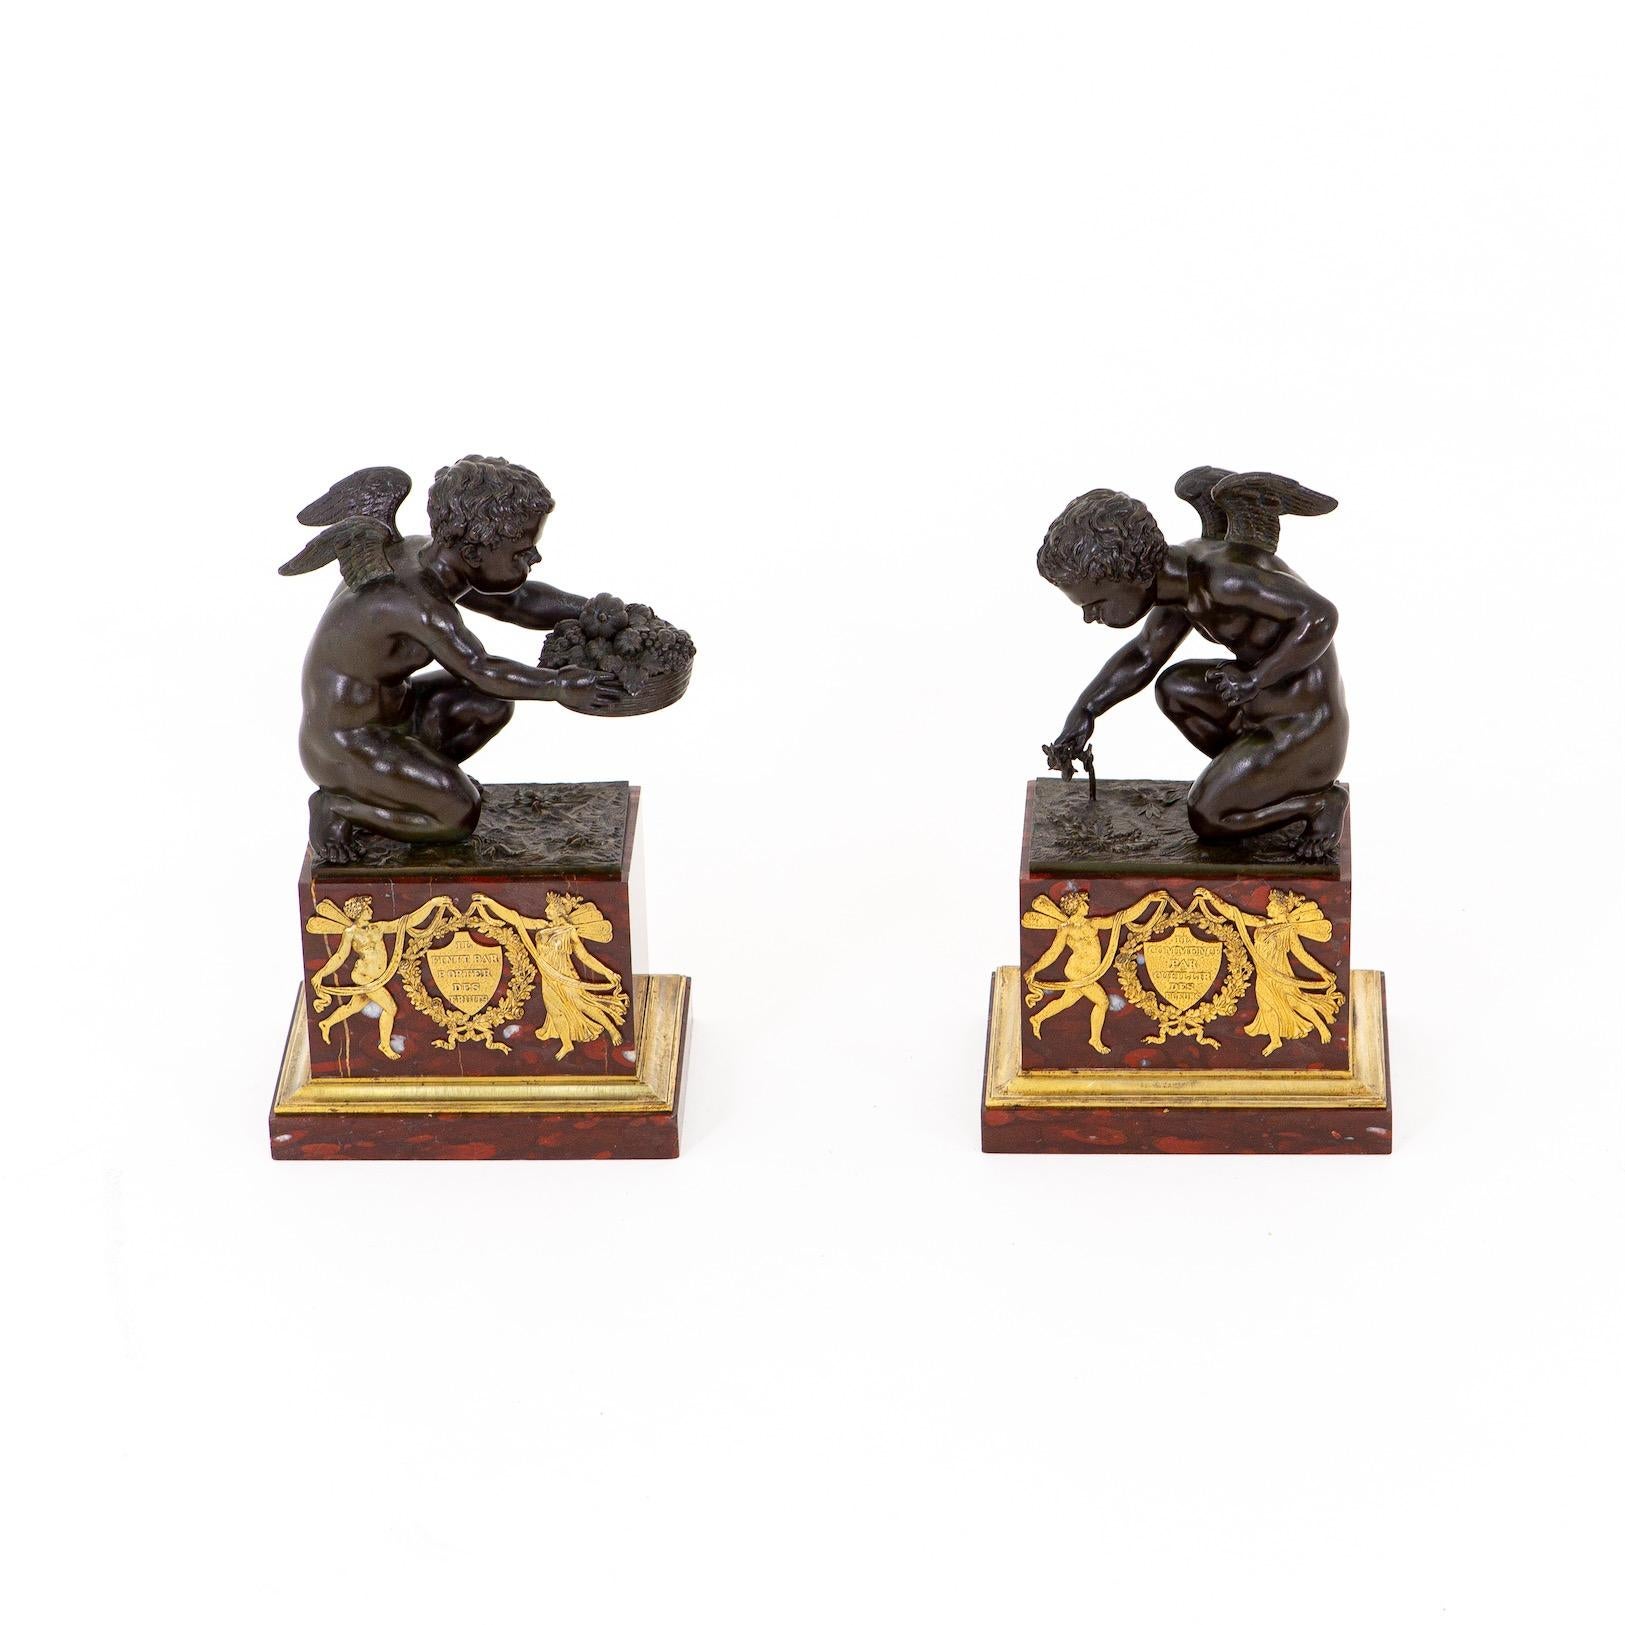 Pair of putti as personifications of two lovers on marbre griotte bases. Bronze burnished and gilded. Inscribed in cartouches on the fronts 'Il Finit Par Porter Des Fruits' and 'Il Commence Oar Cueillir Des Fleurs' and surrounded by winged male and